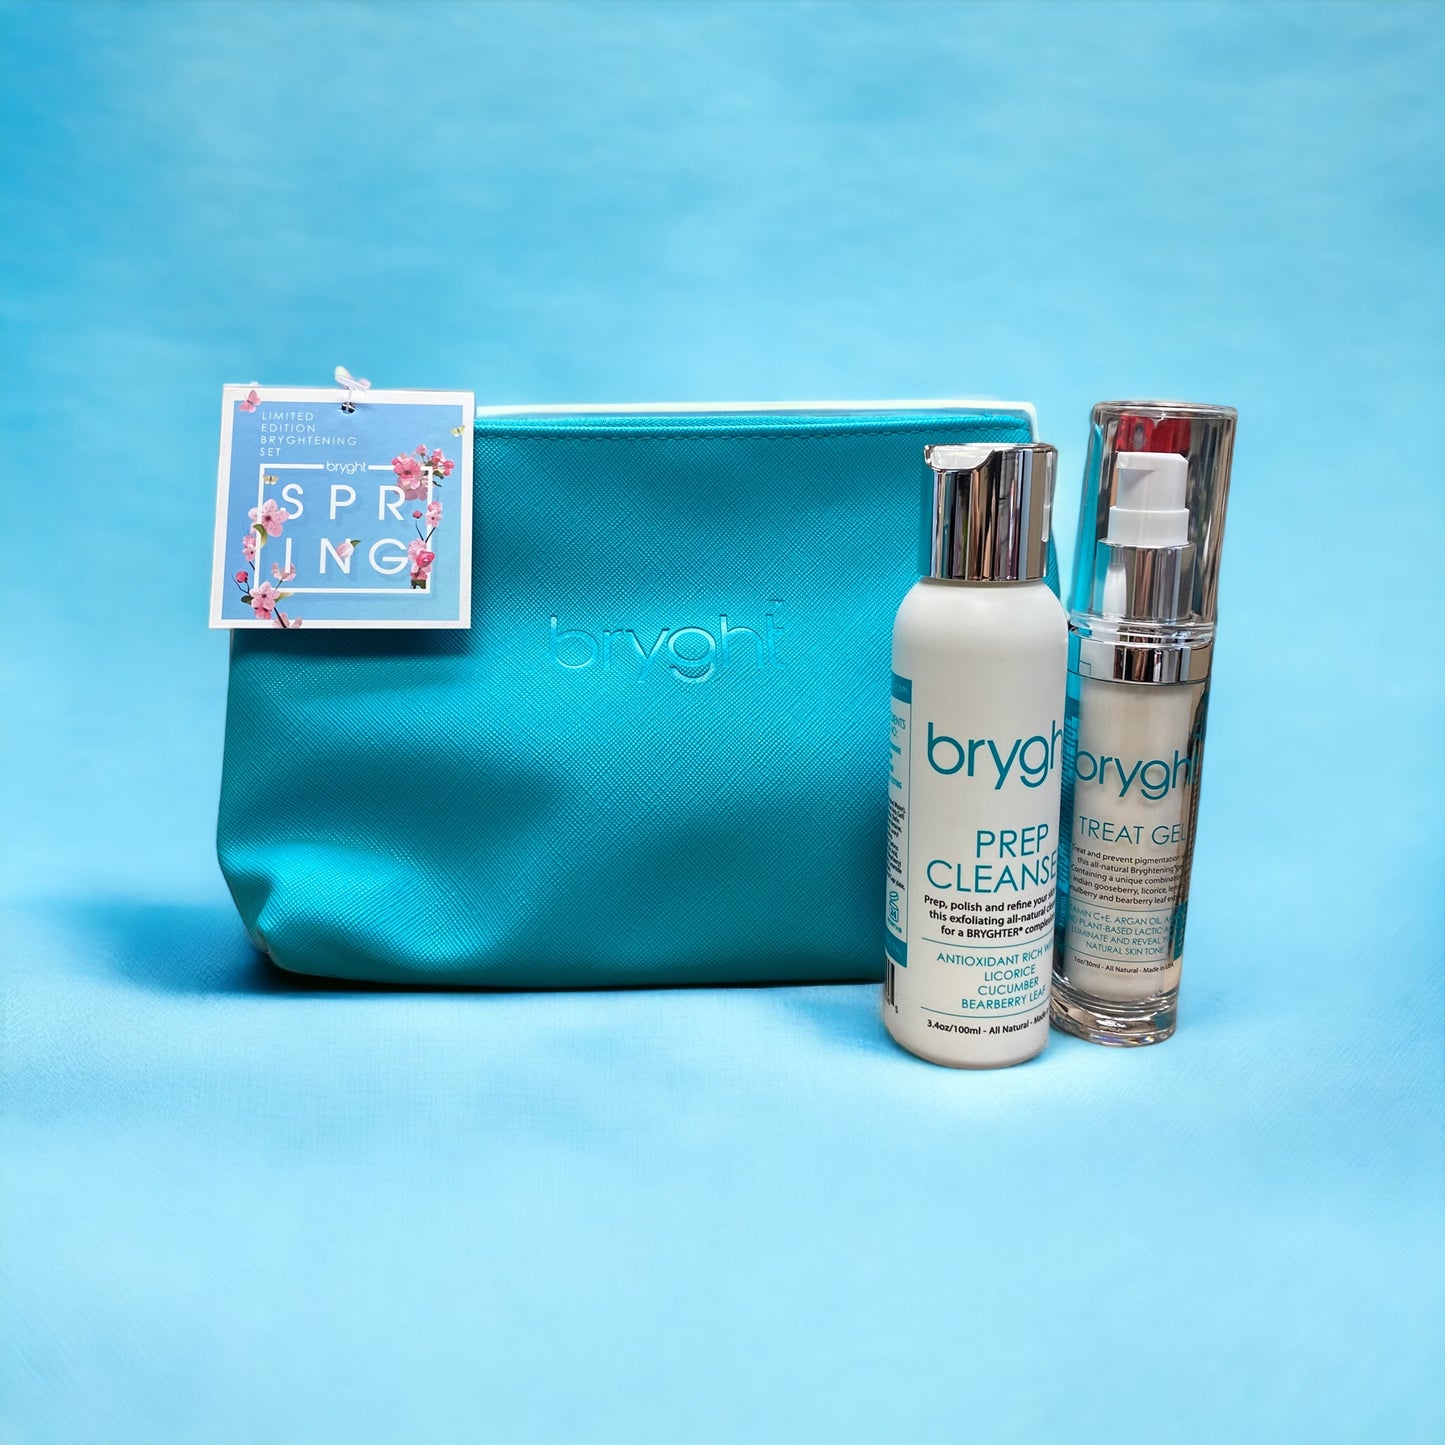 Limited Edition Duo Kit Gift Set